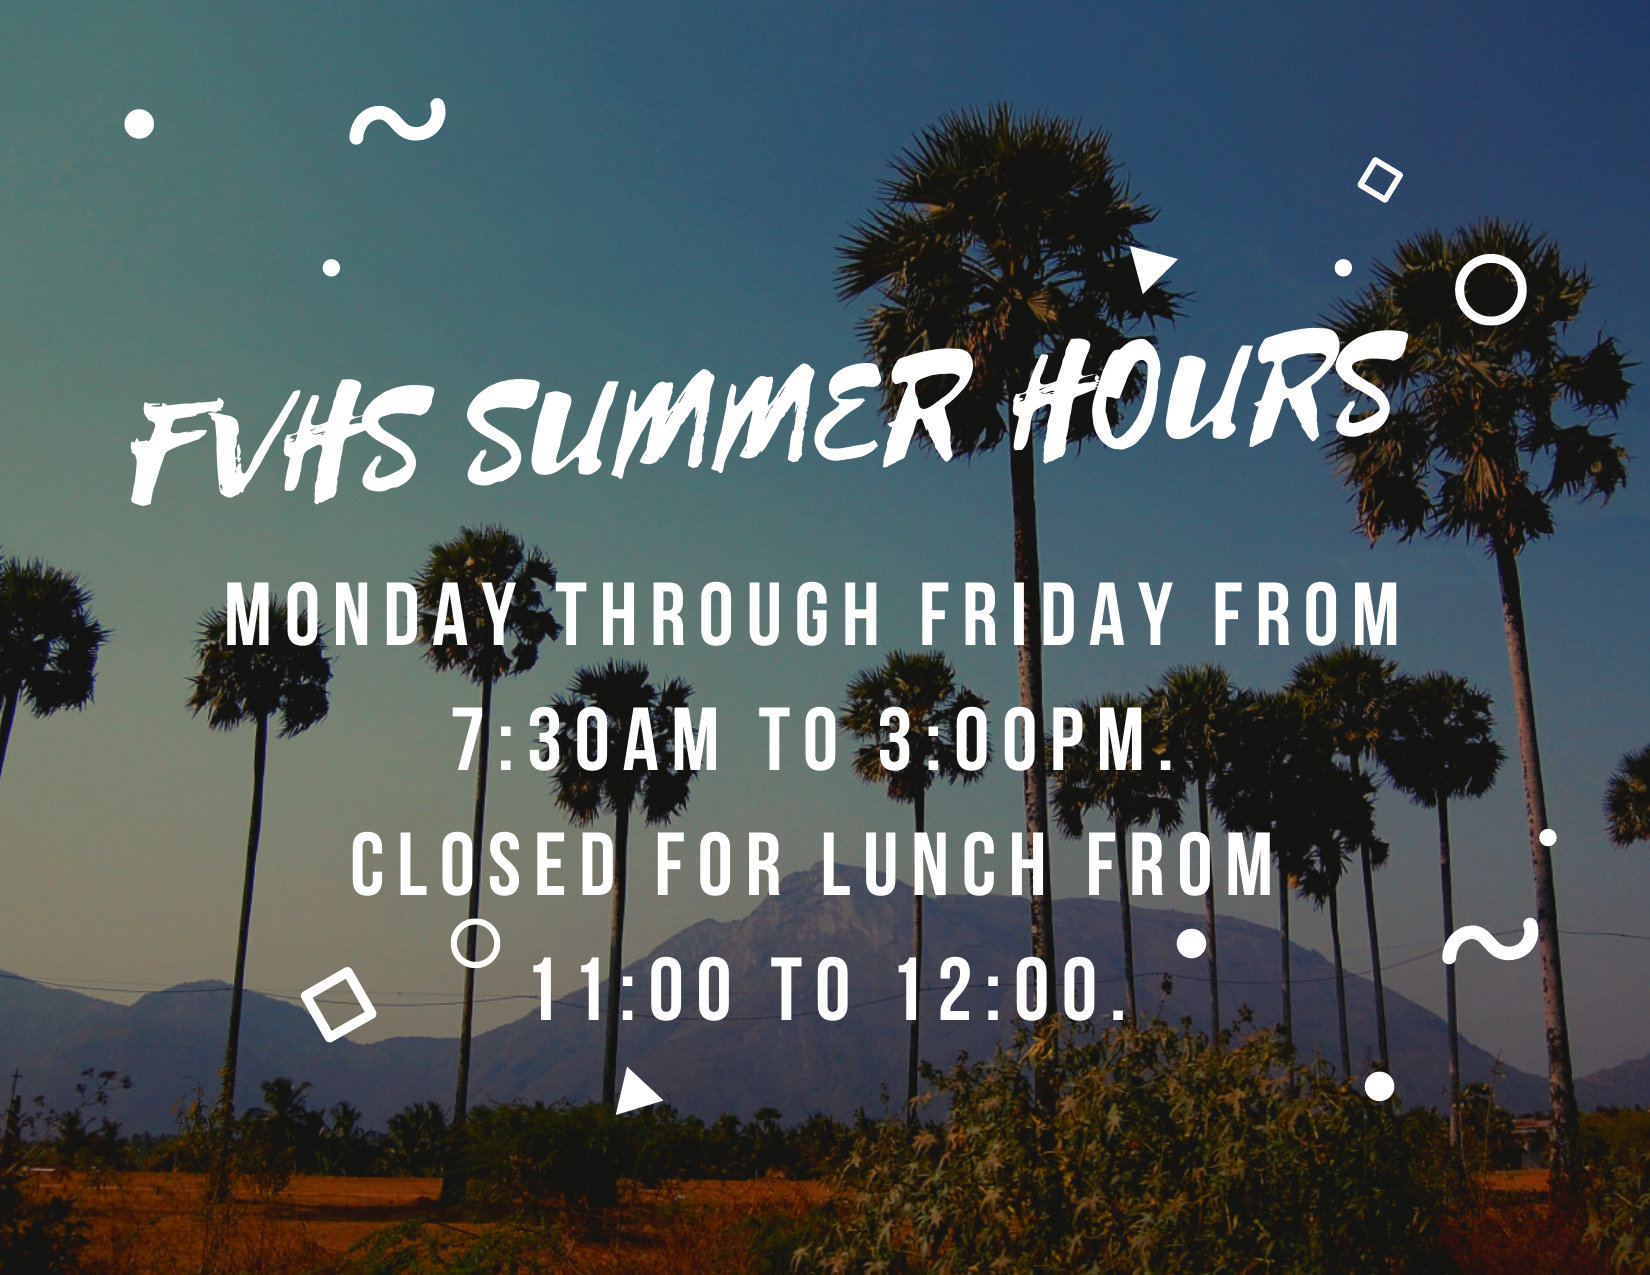 Monday through Friday from 7:30am to 3:00pm.  Closed for lunch from 11:00 to 12:00.